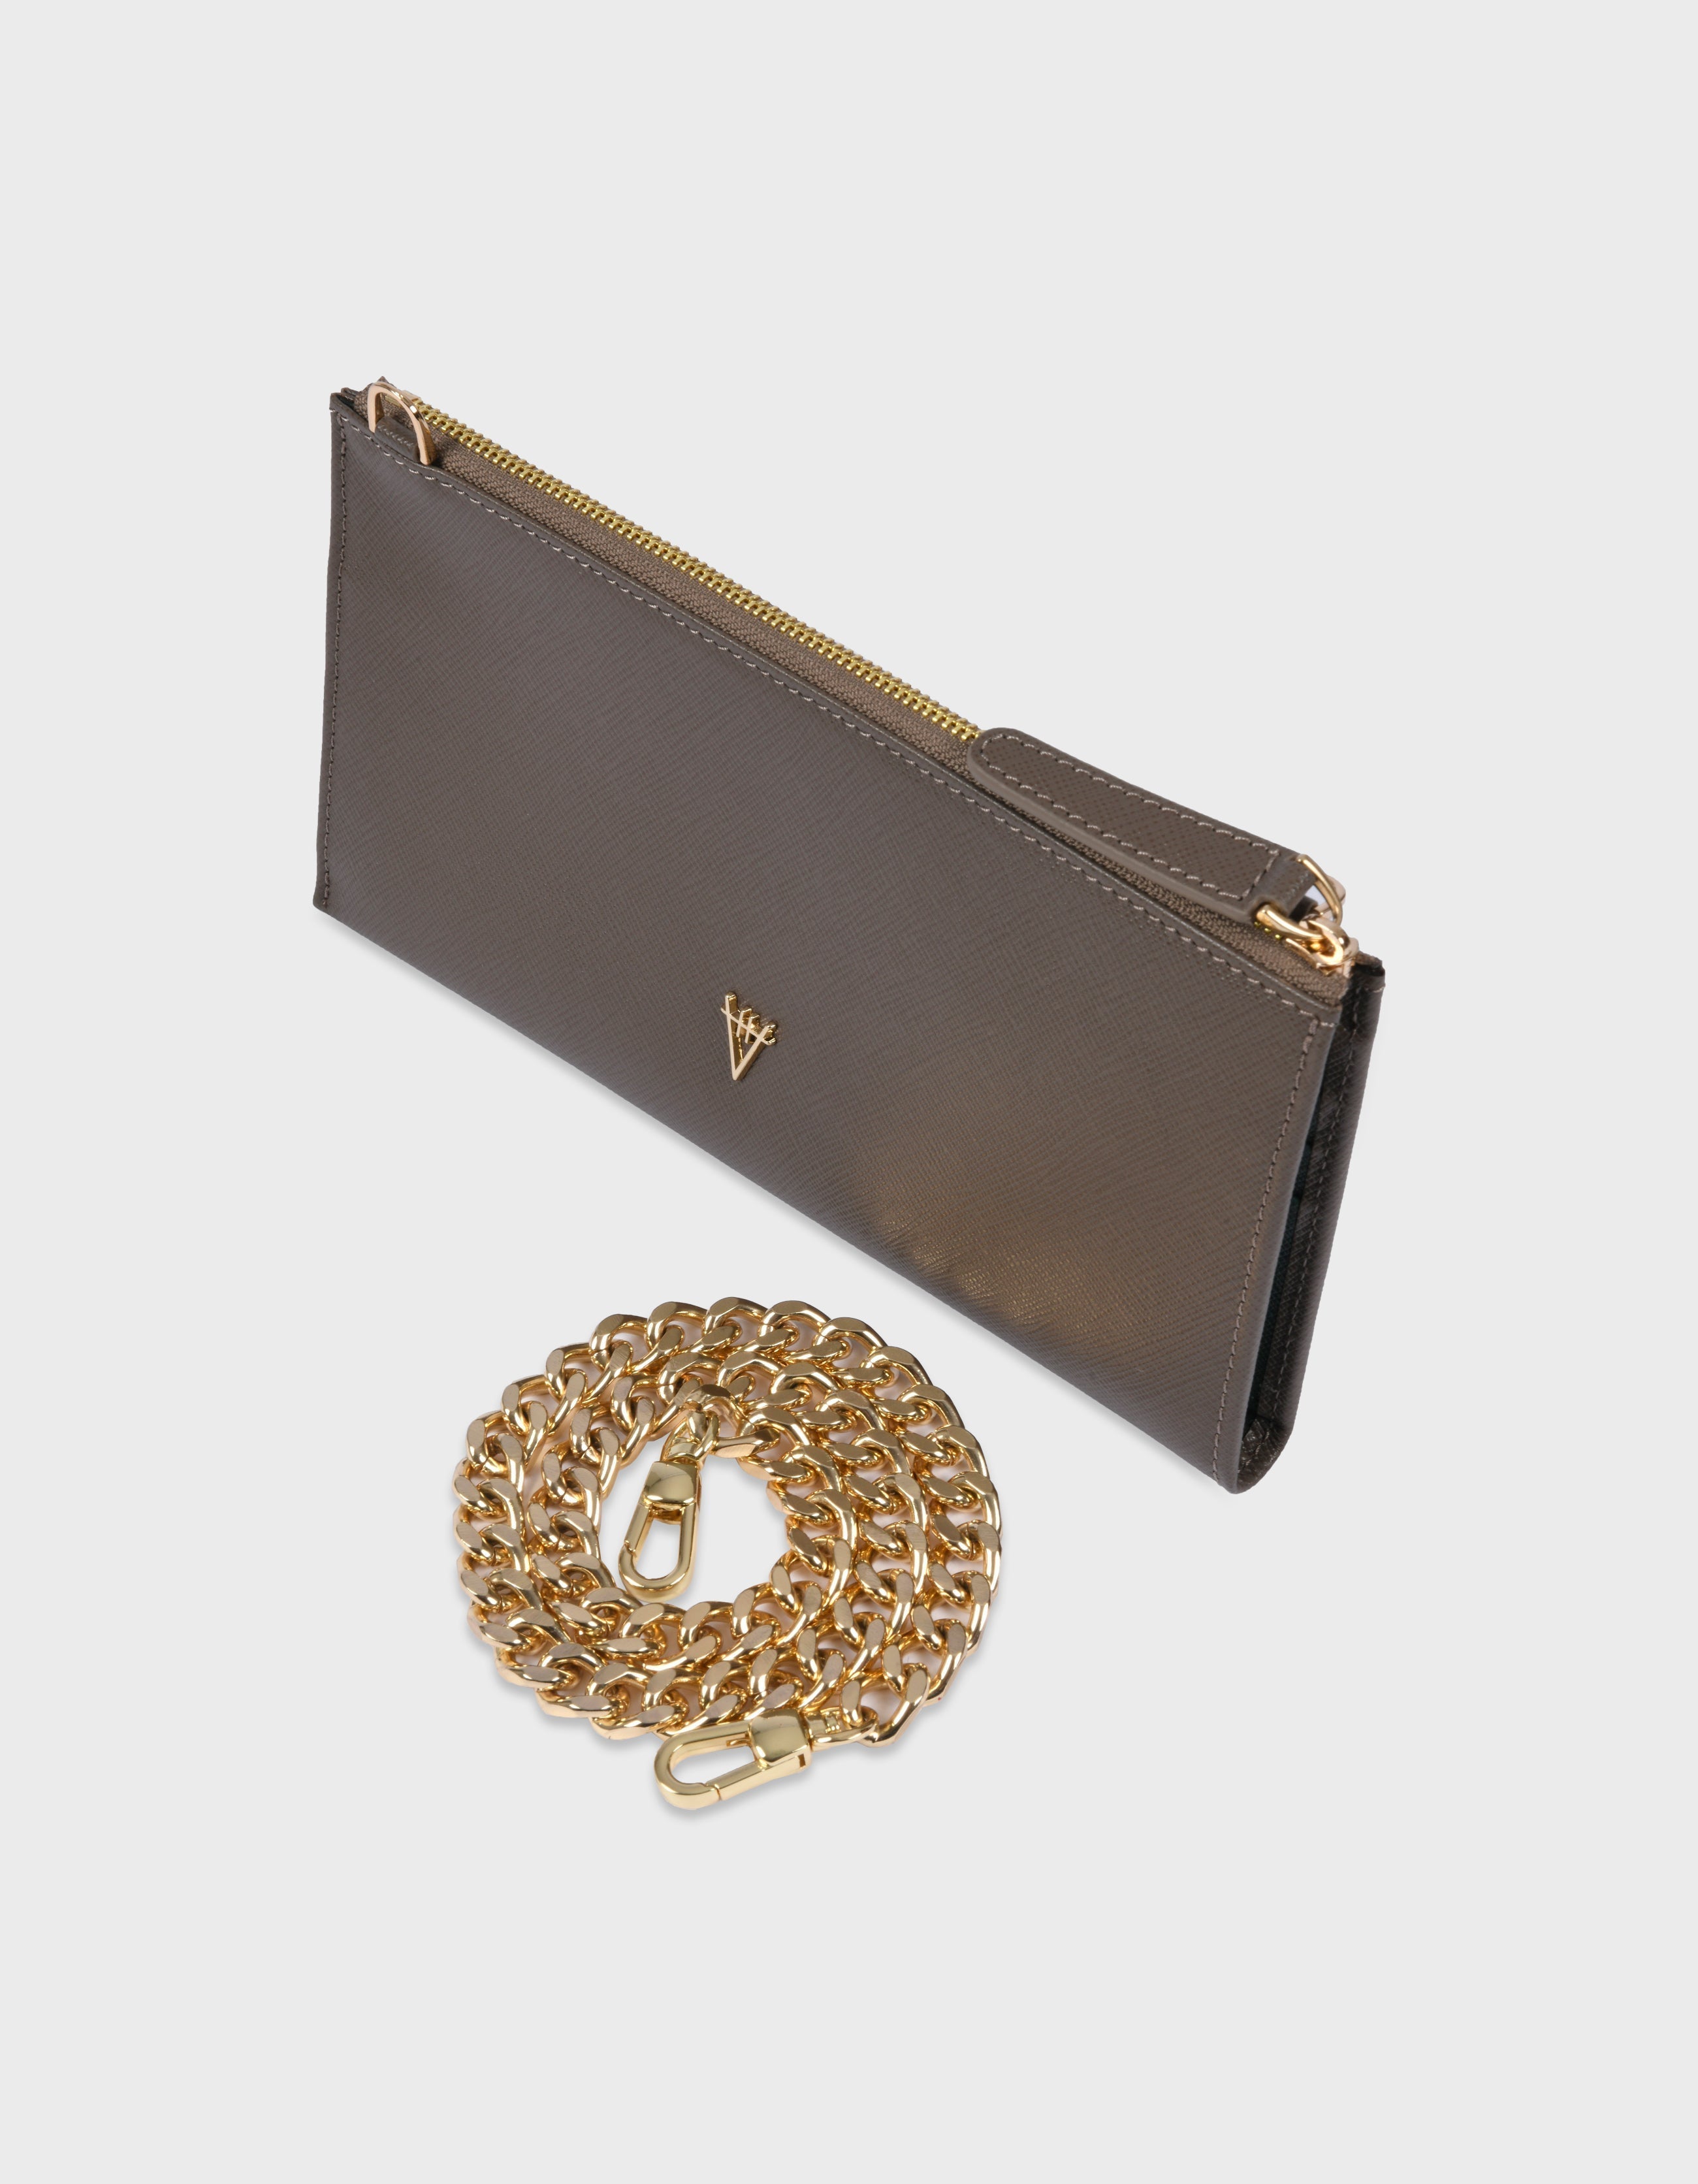 Omnia Chain Bag & Clutch - Finest Quality HiVa Atelier GmbH Leather Accessories